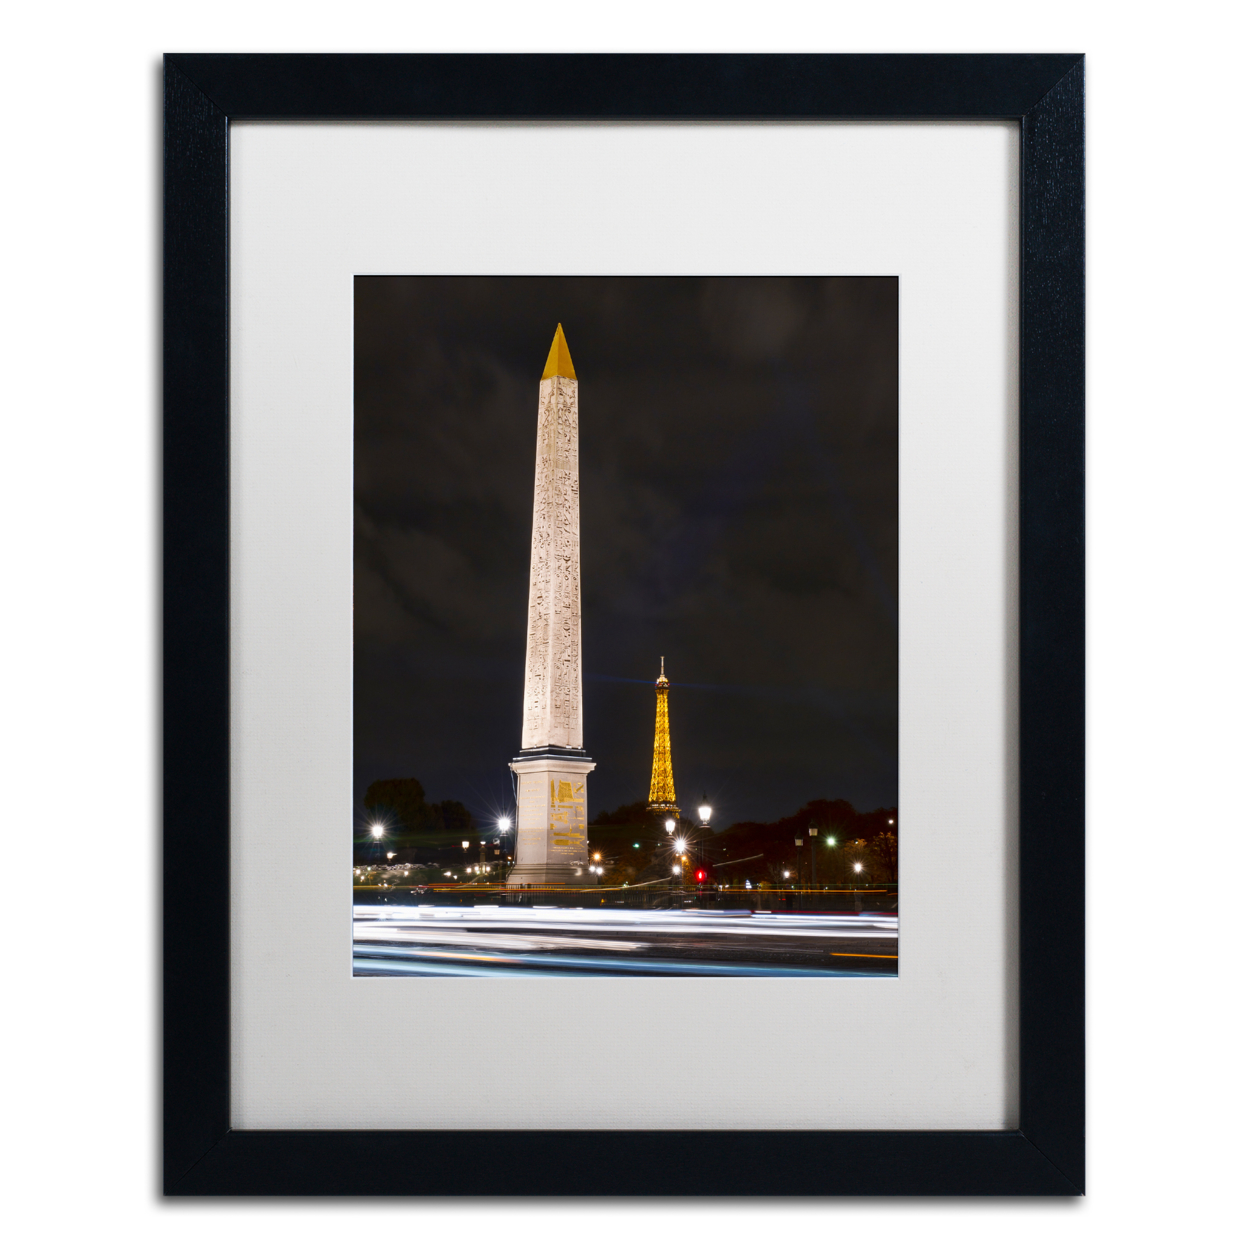 Michael Blanchette Photography 'Concorde Place' Black Wooden Framed Art 18 X 22 Inches